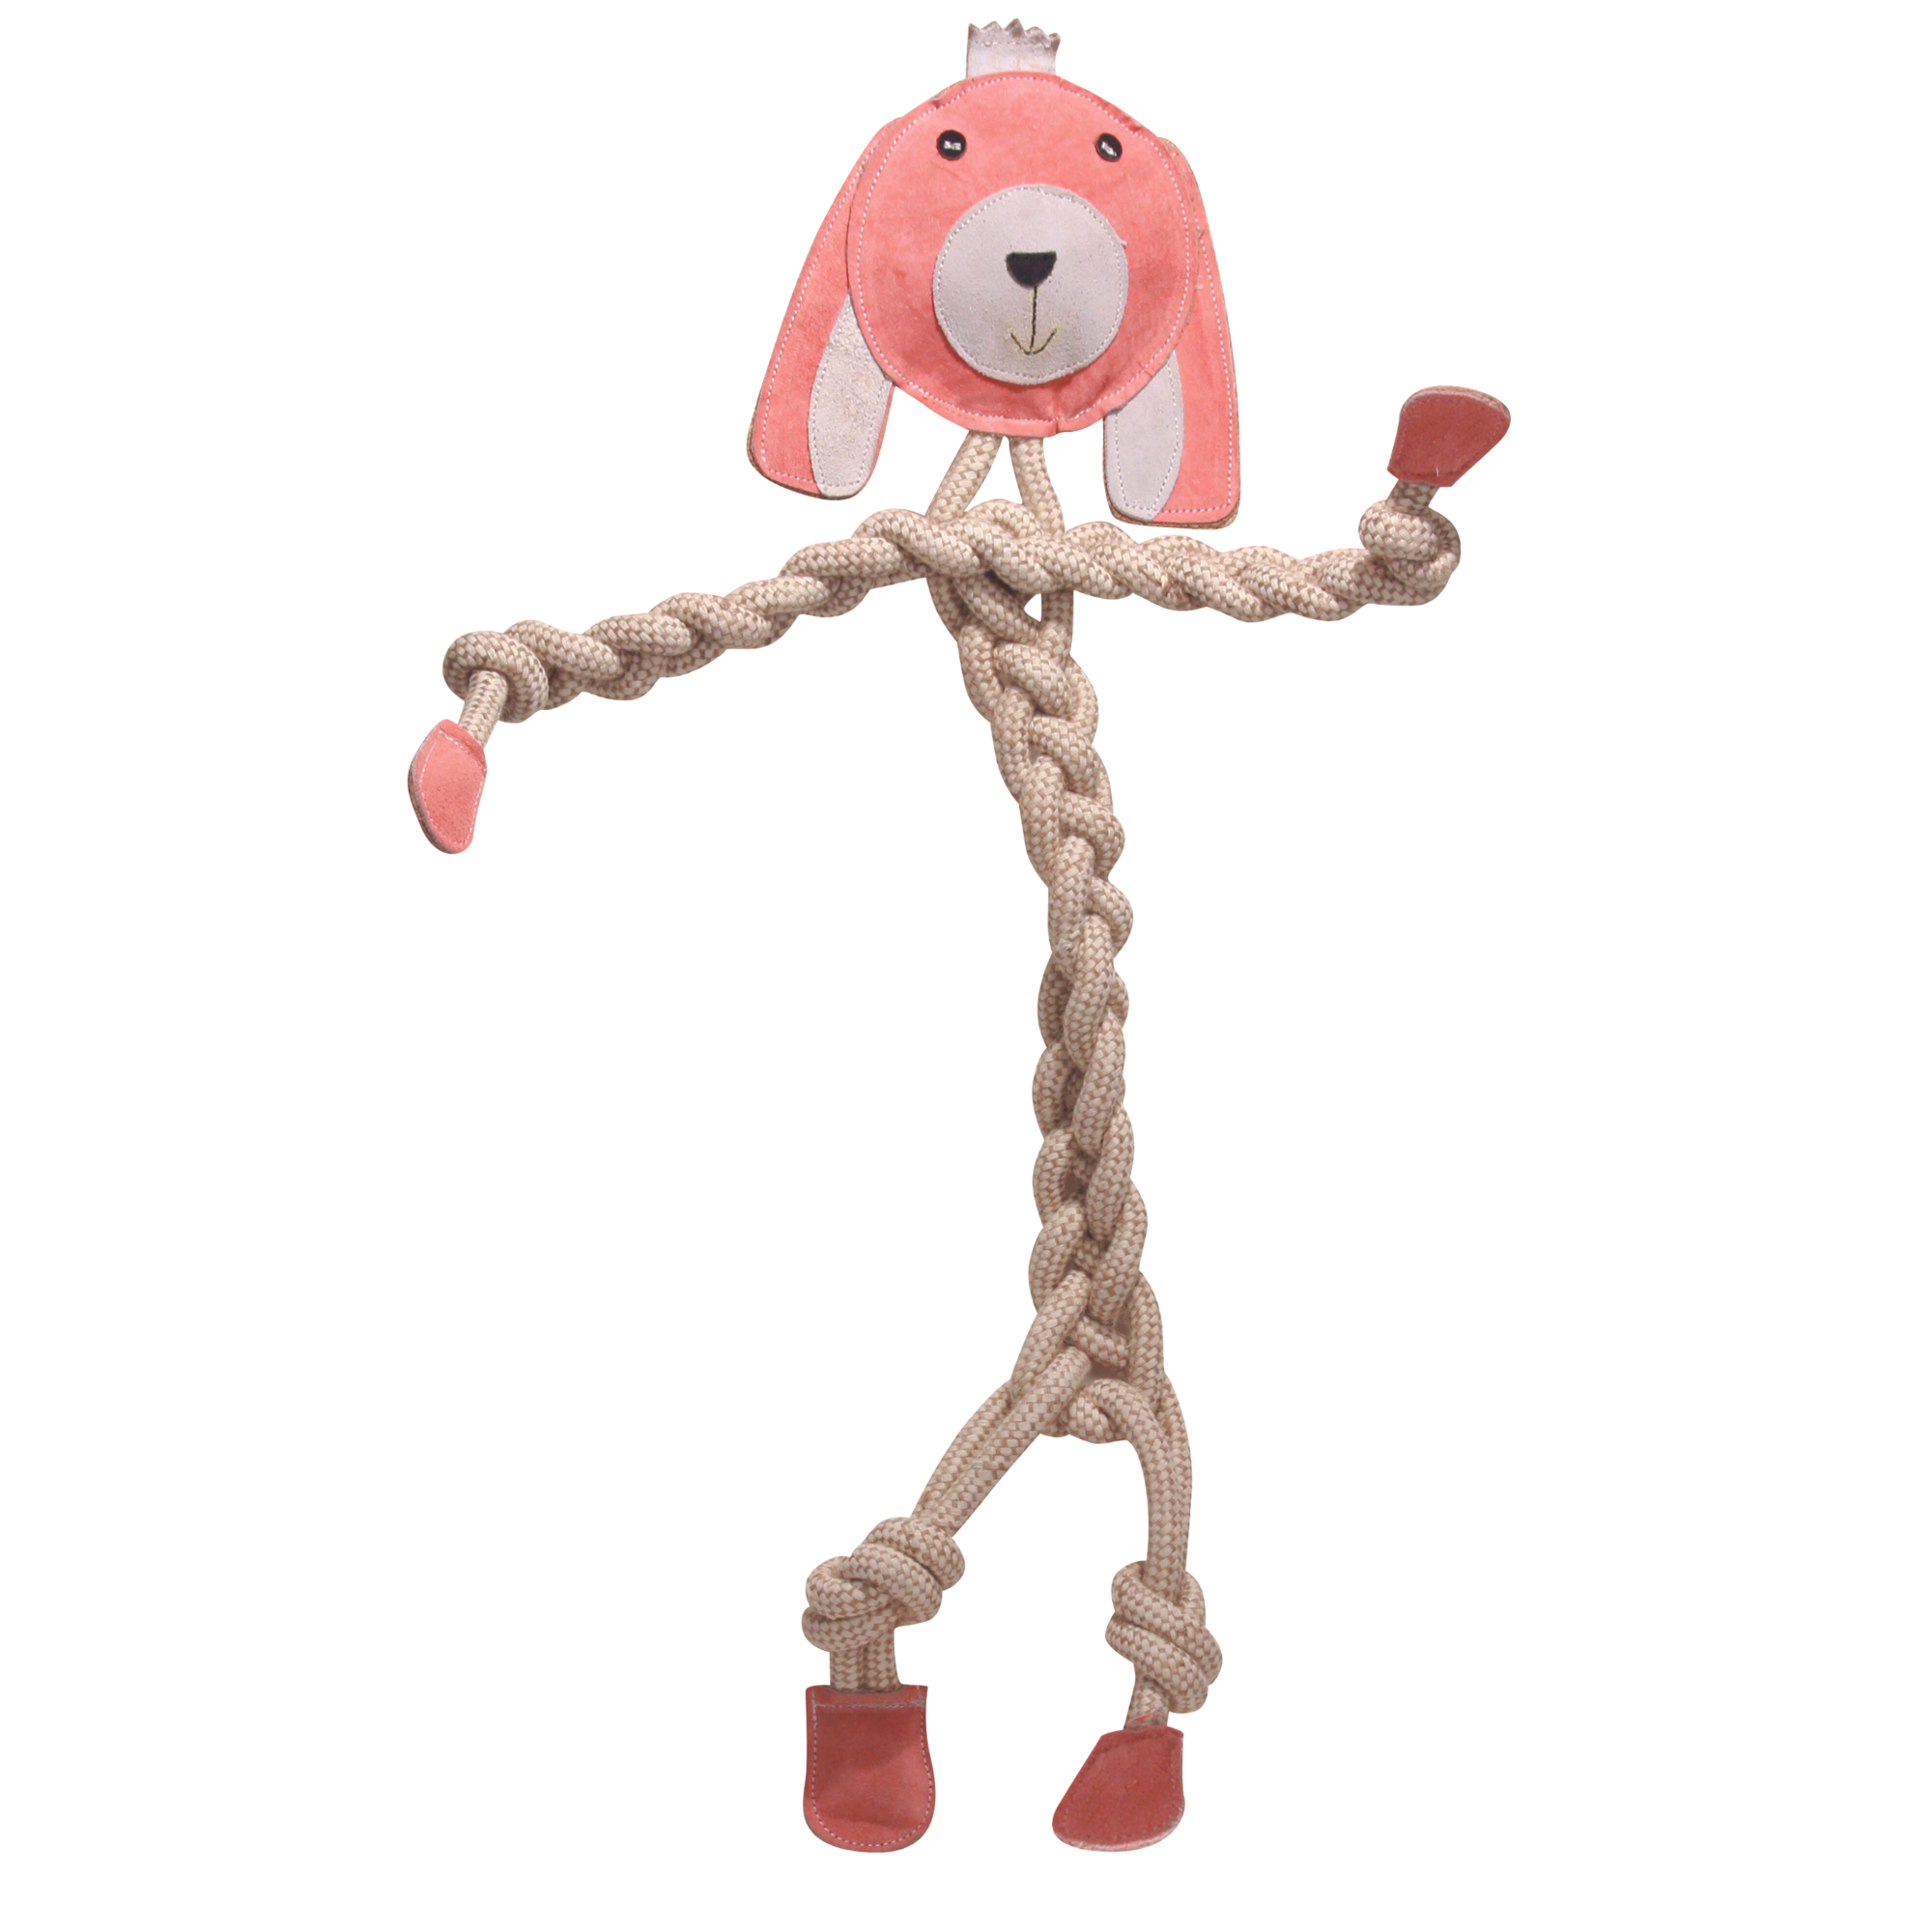 Large Bitsy the Bunny Natrual Rope dog toy. Bitsy has a pink fur with a pink face, with pink leather hands, feet, and a knotted rope body, arms, and legs. Bitsy is made out of natrual cotton, hemp, leather, coconut fiber materials, and has natrual dyes. 